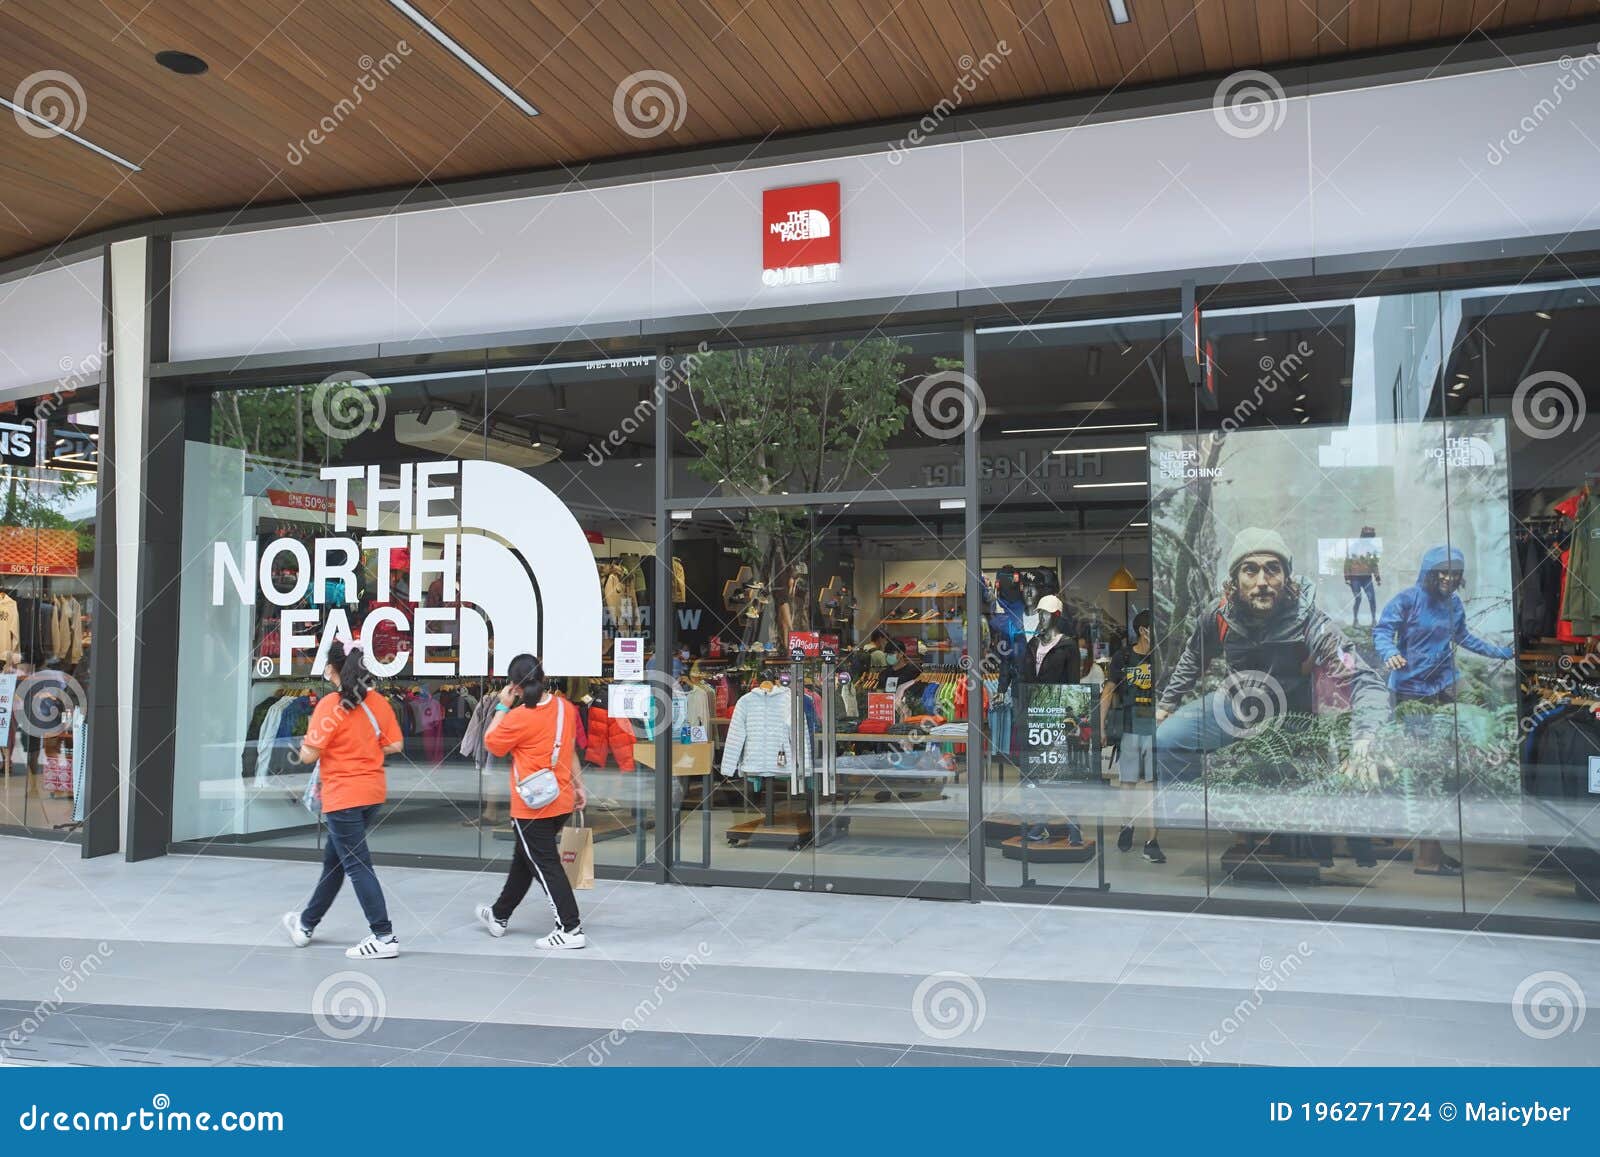 The North Face Shop in Siam Premium Outlets Bangkok Editorial Stock Image -  Image of north, destinations: 196271724